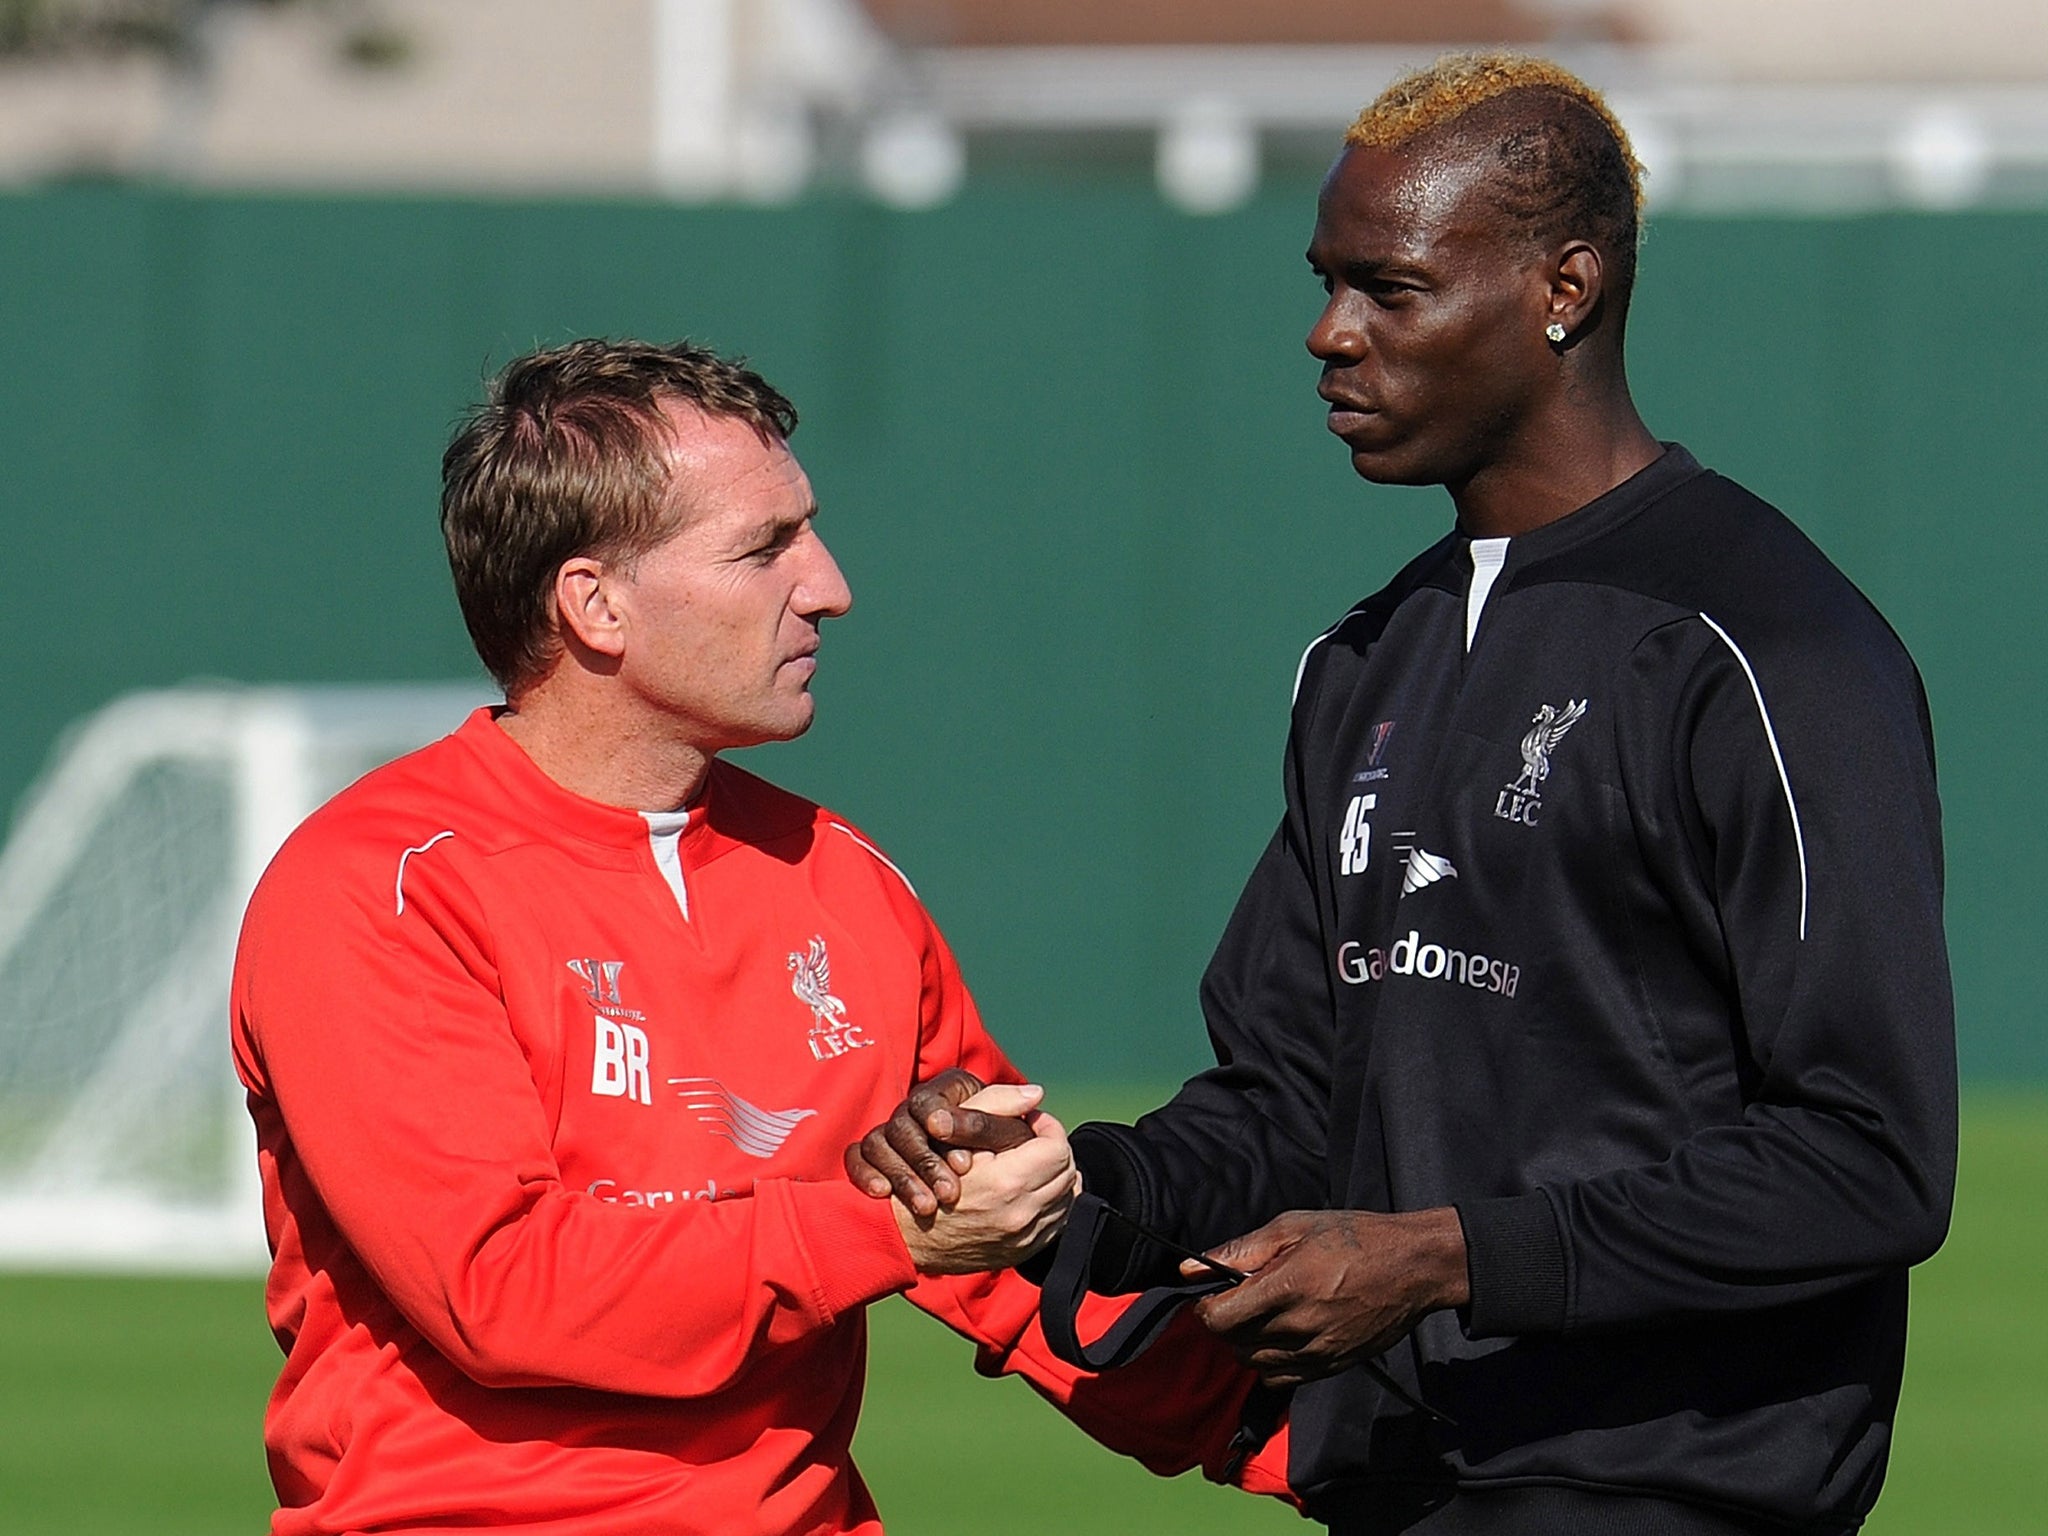 Brendan Rodgers and Mario Balotelli at Liverpool’s training ground